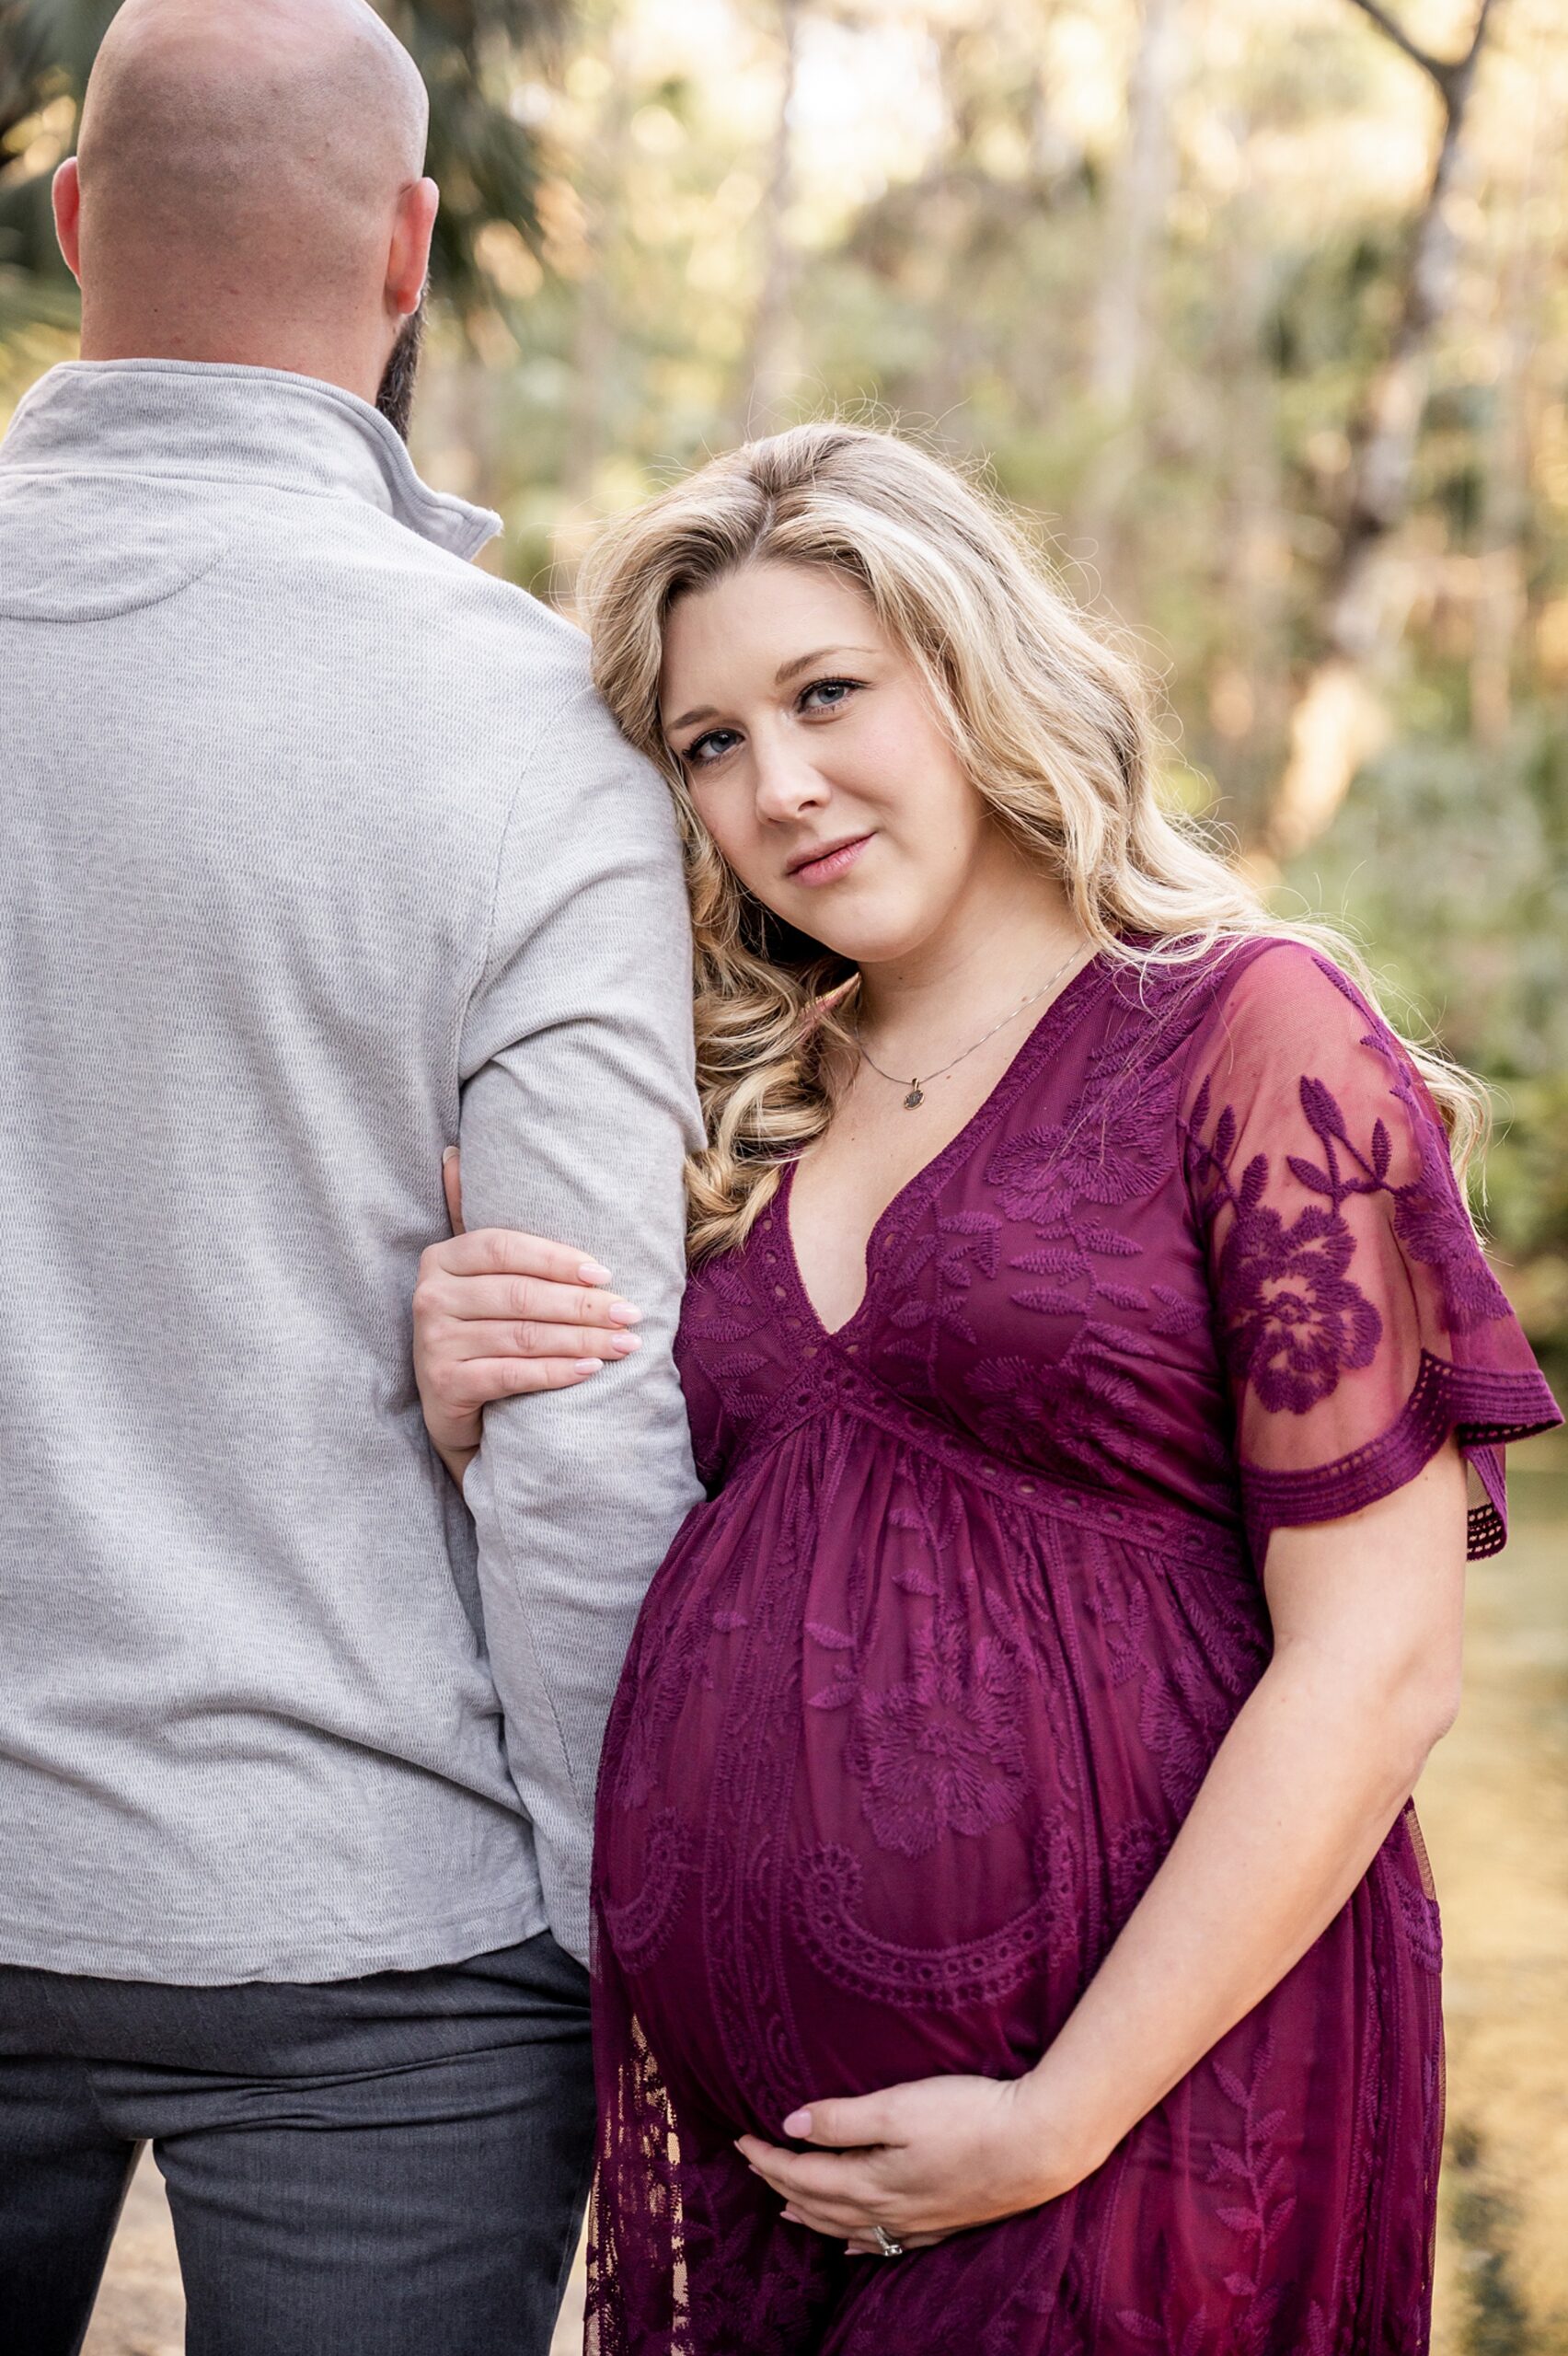 A mother to be in a purple maternity gown holds and leans onto the arm of her husband carrboro midwifery